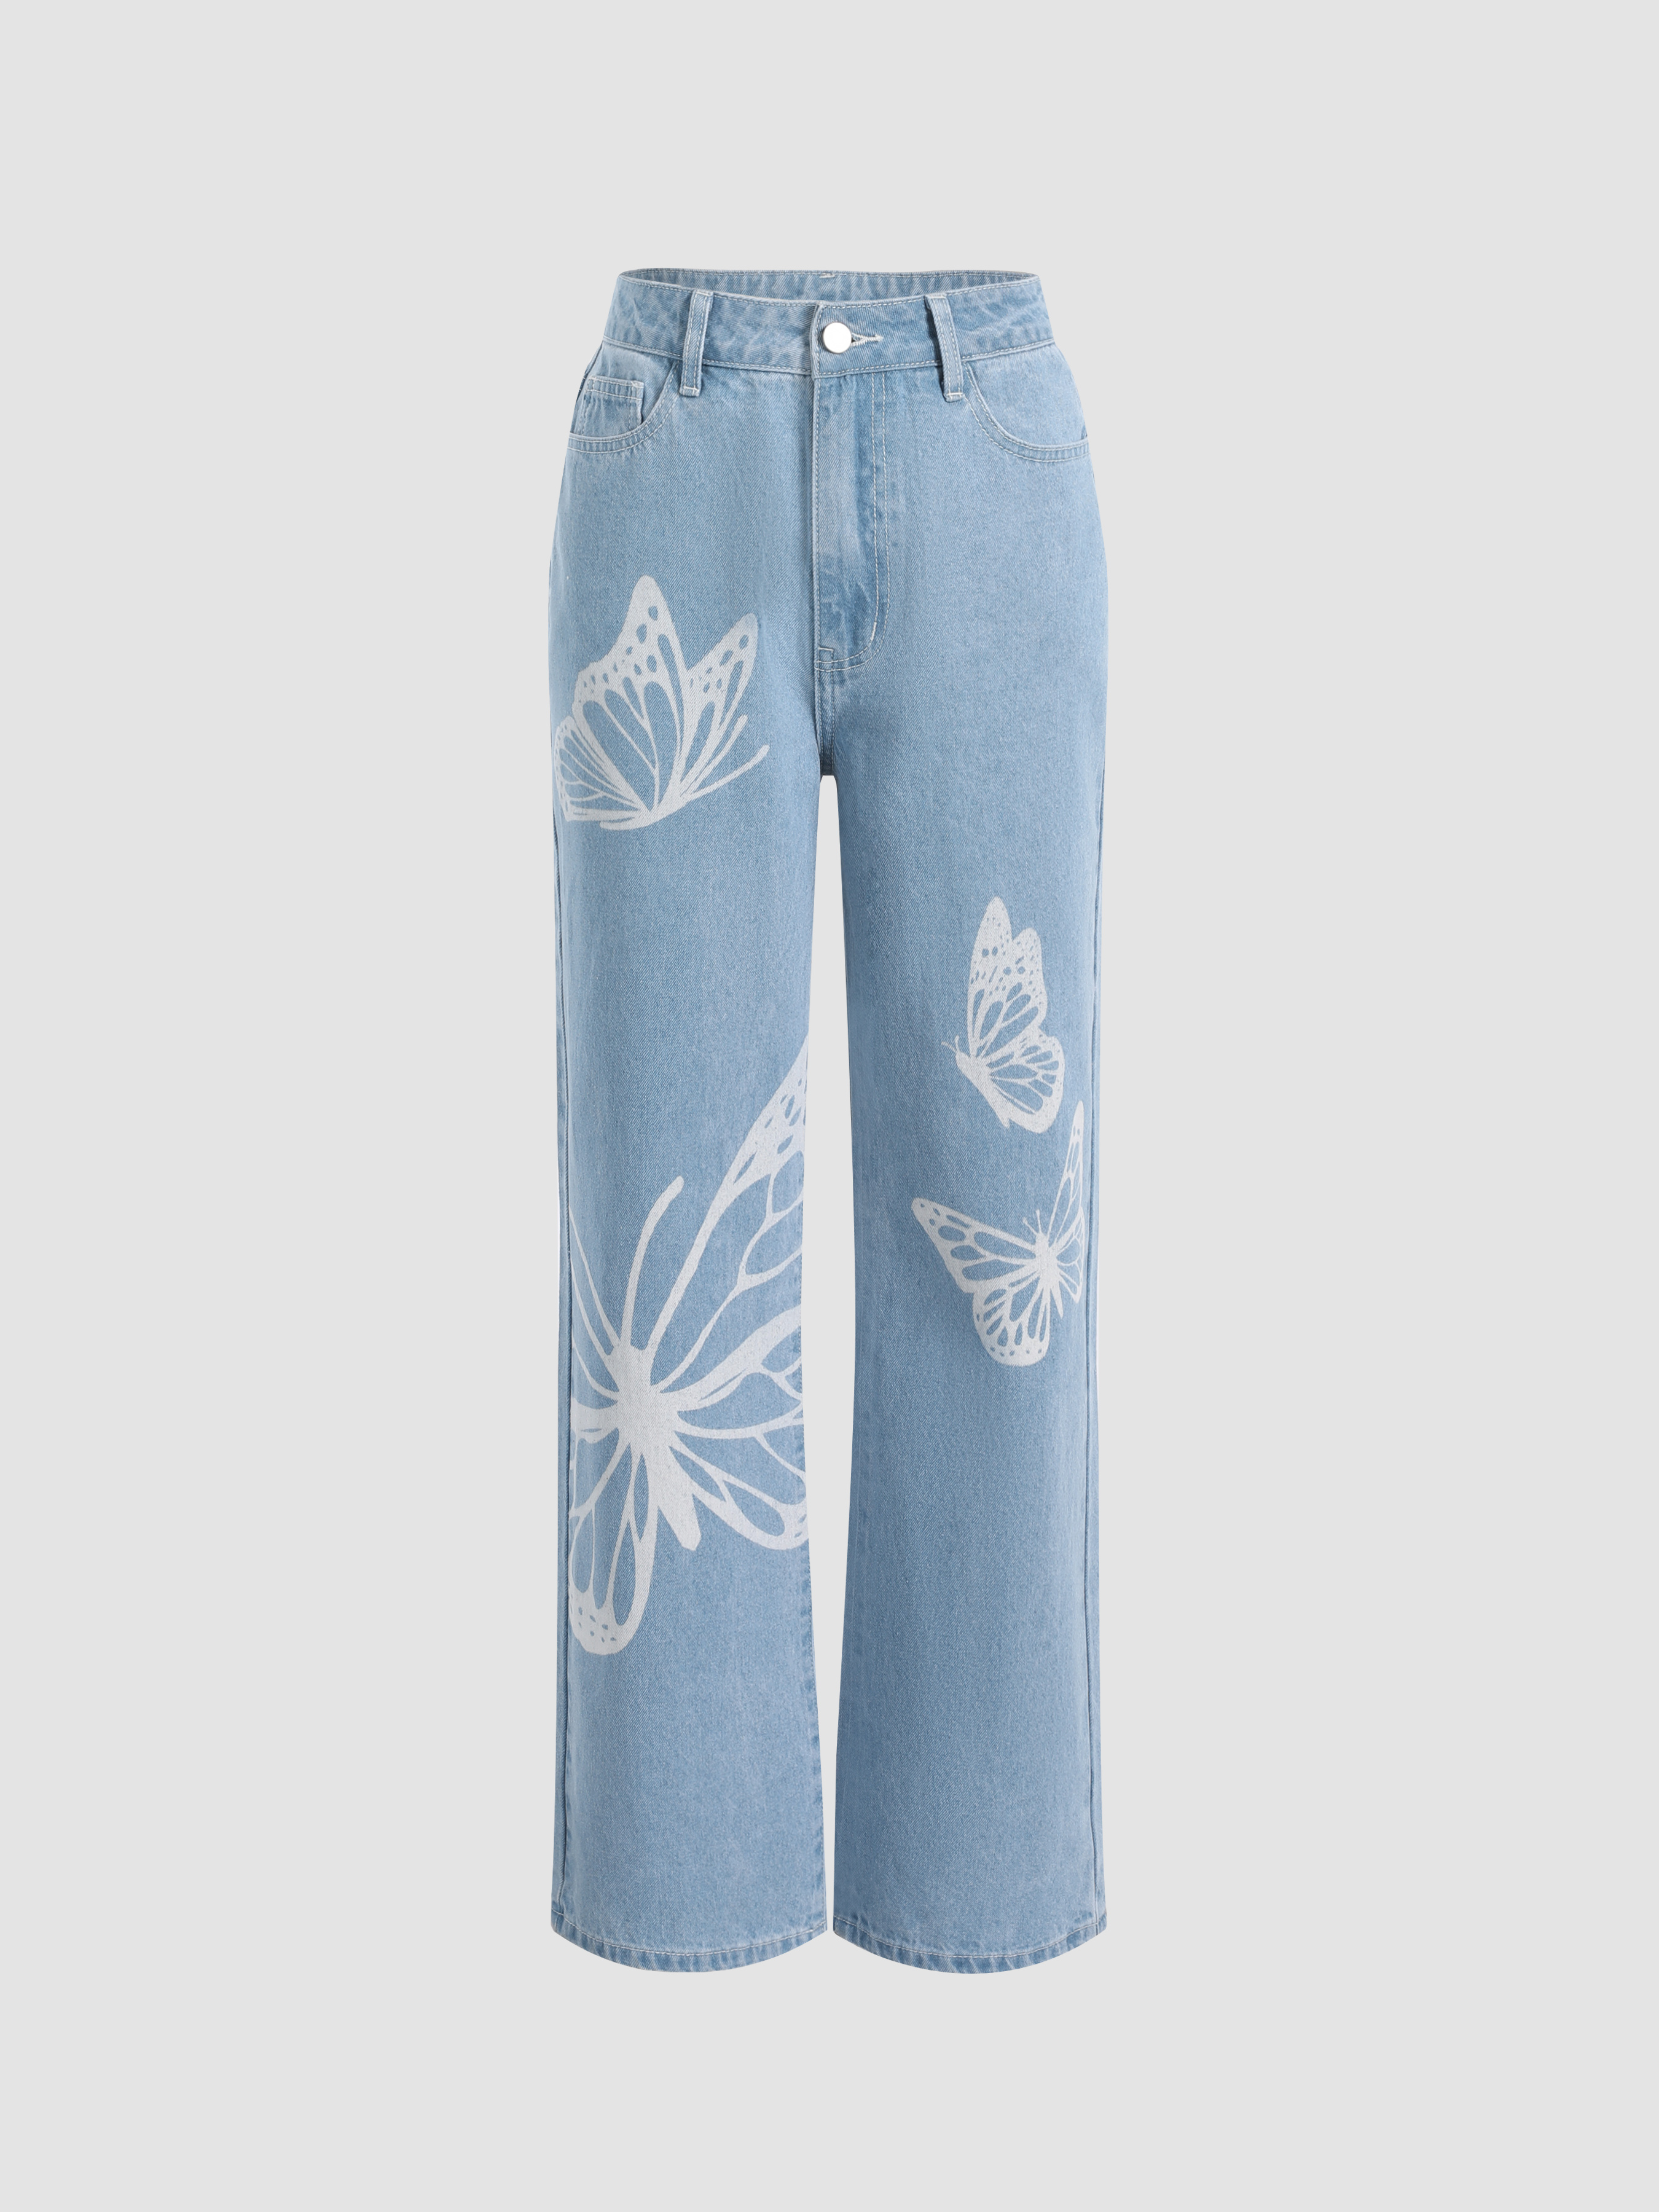 Butterfly Print Straight Leg Jeans - Cider